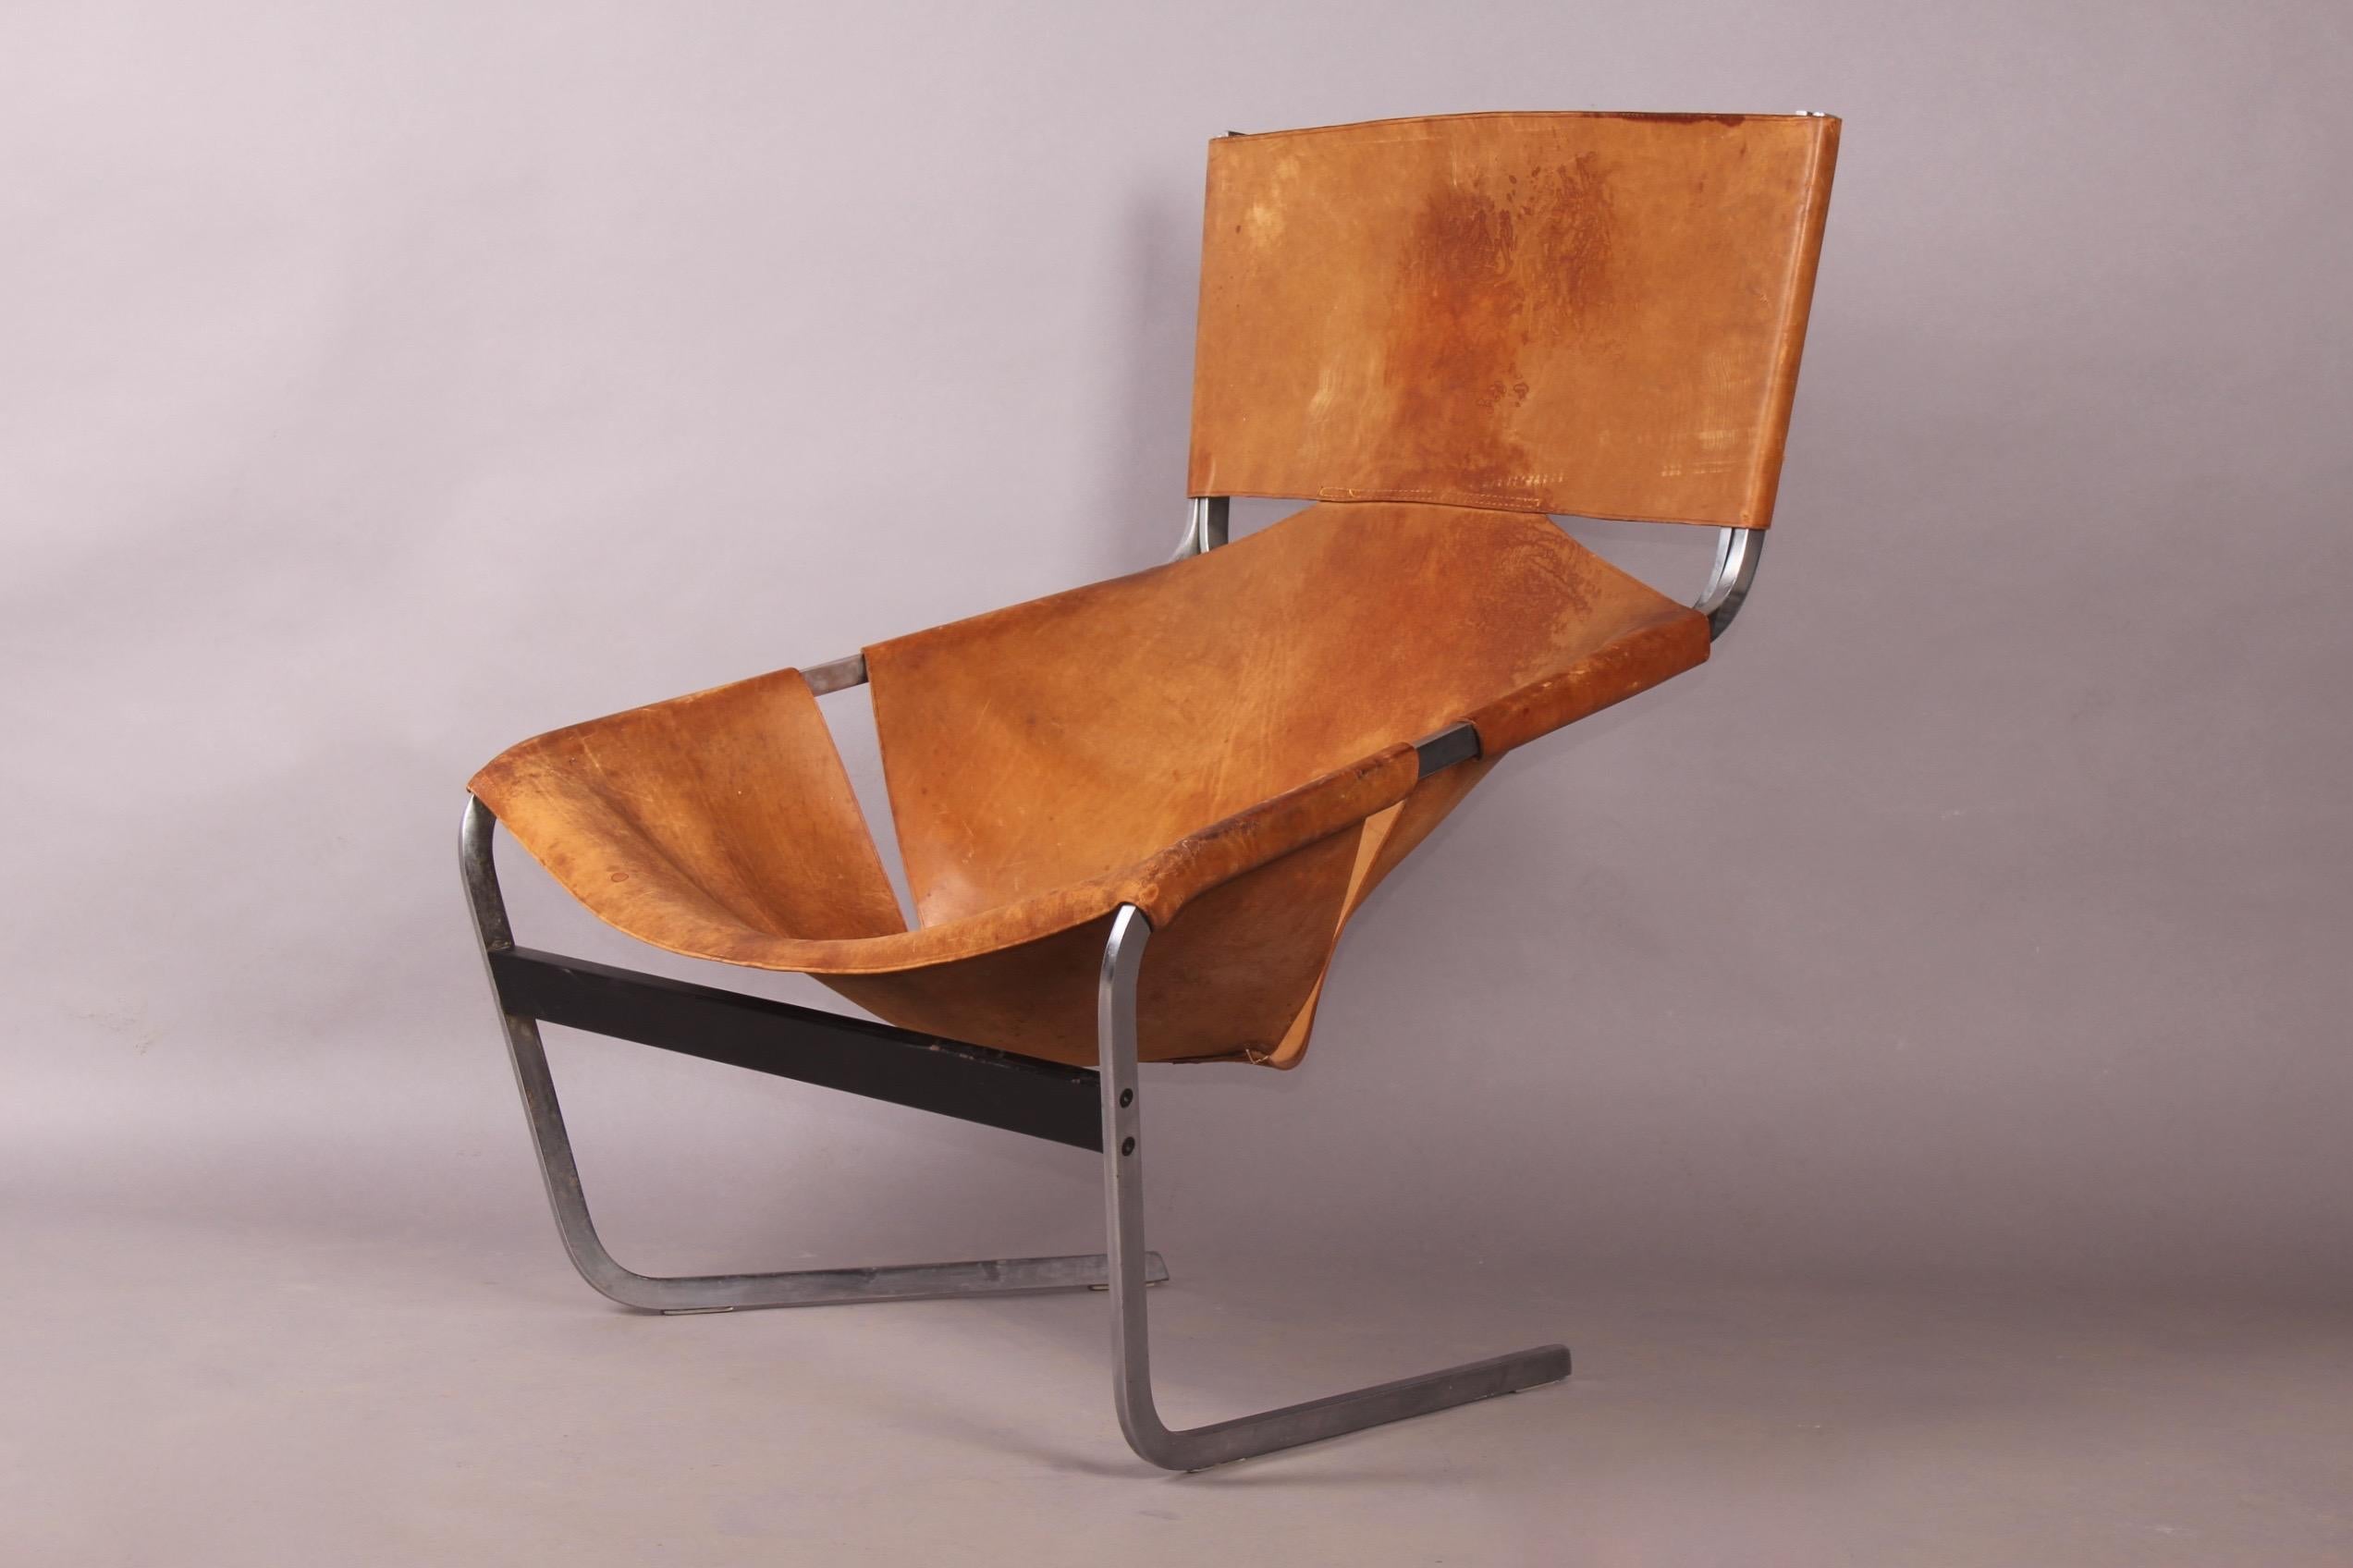 Pierre Paulin lounge chair, some small trace of rust, lounge armchair type F444 by Pierre Paulin for Artifort from the 1960s. Classic Mid-Century Modern design. Simple, minimal design with cantilevered chrome-plated frame and original leather.